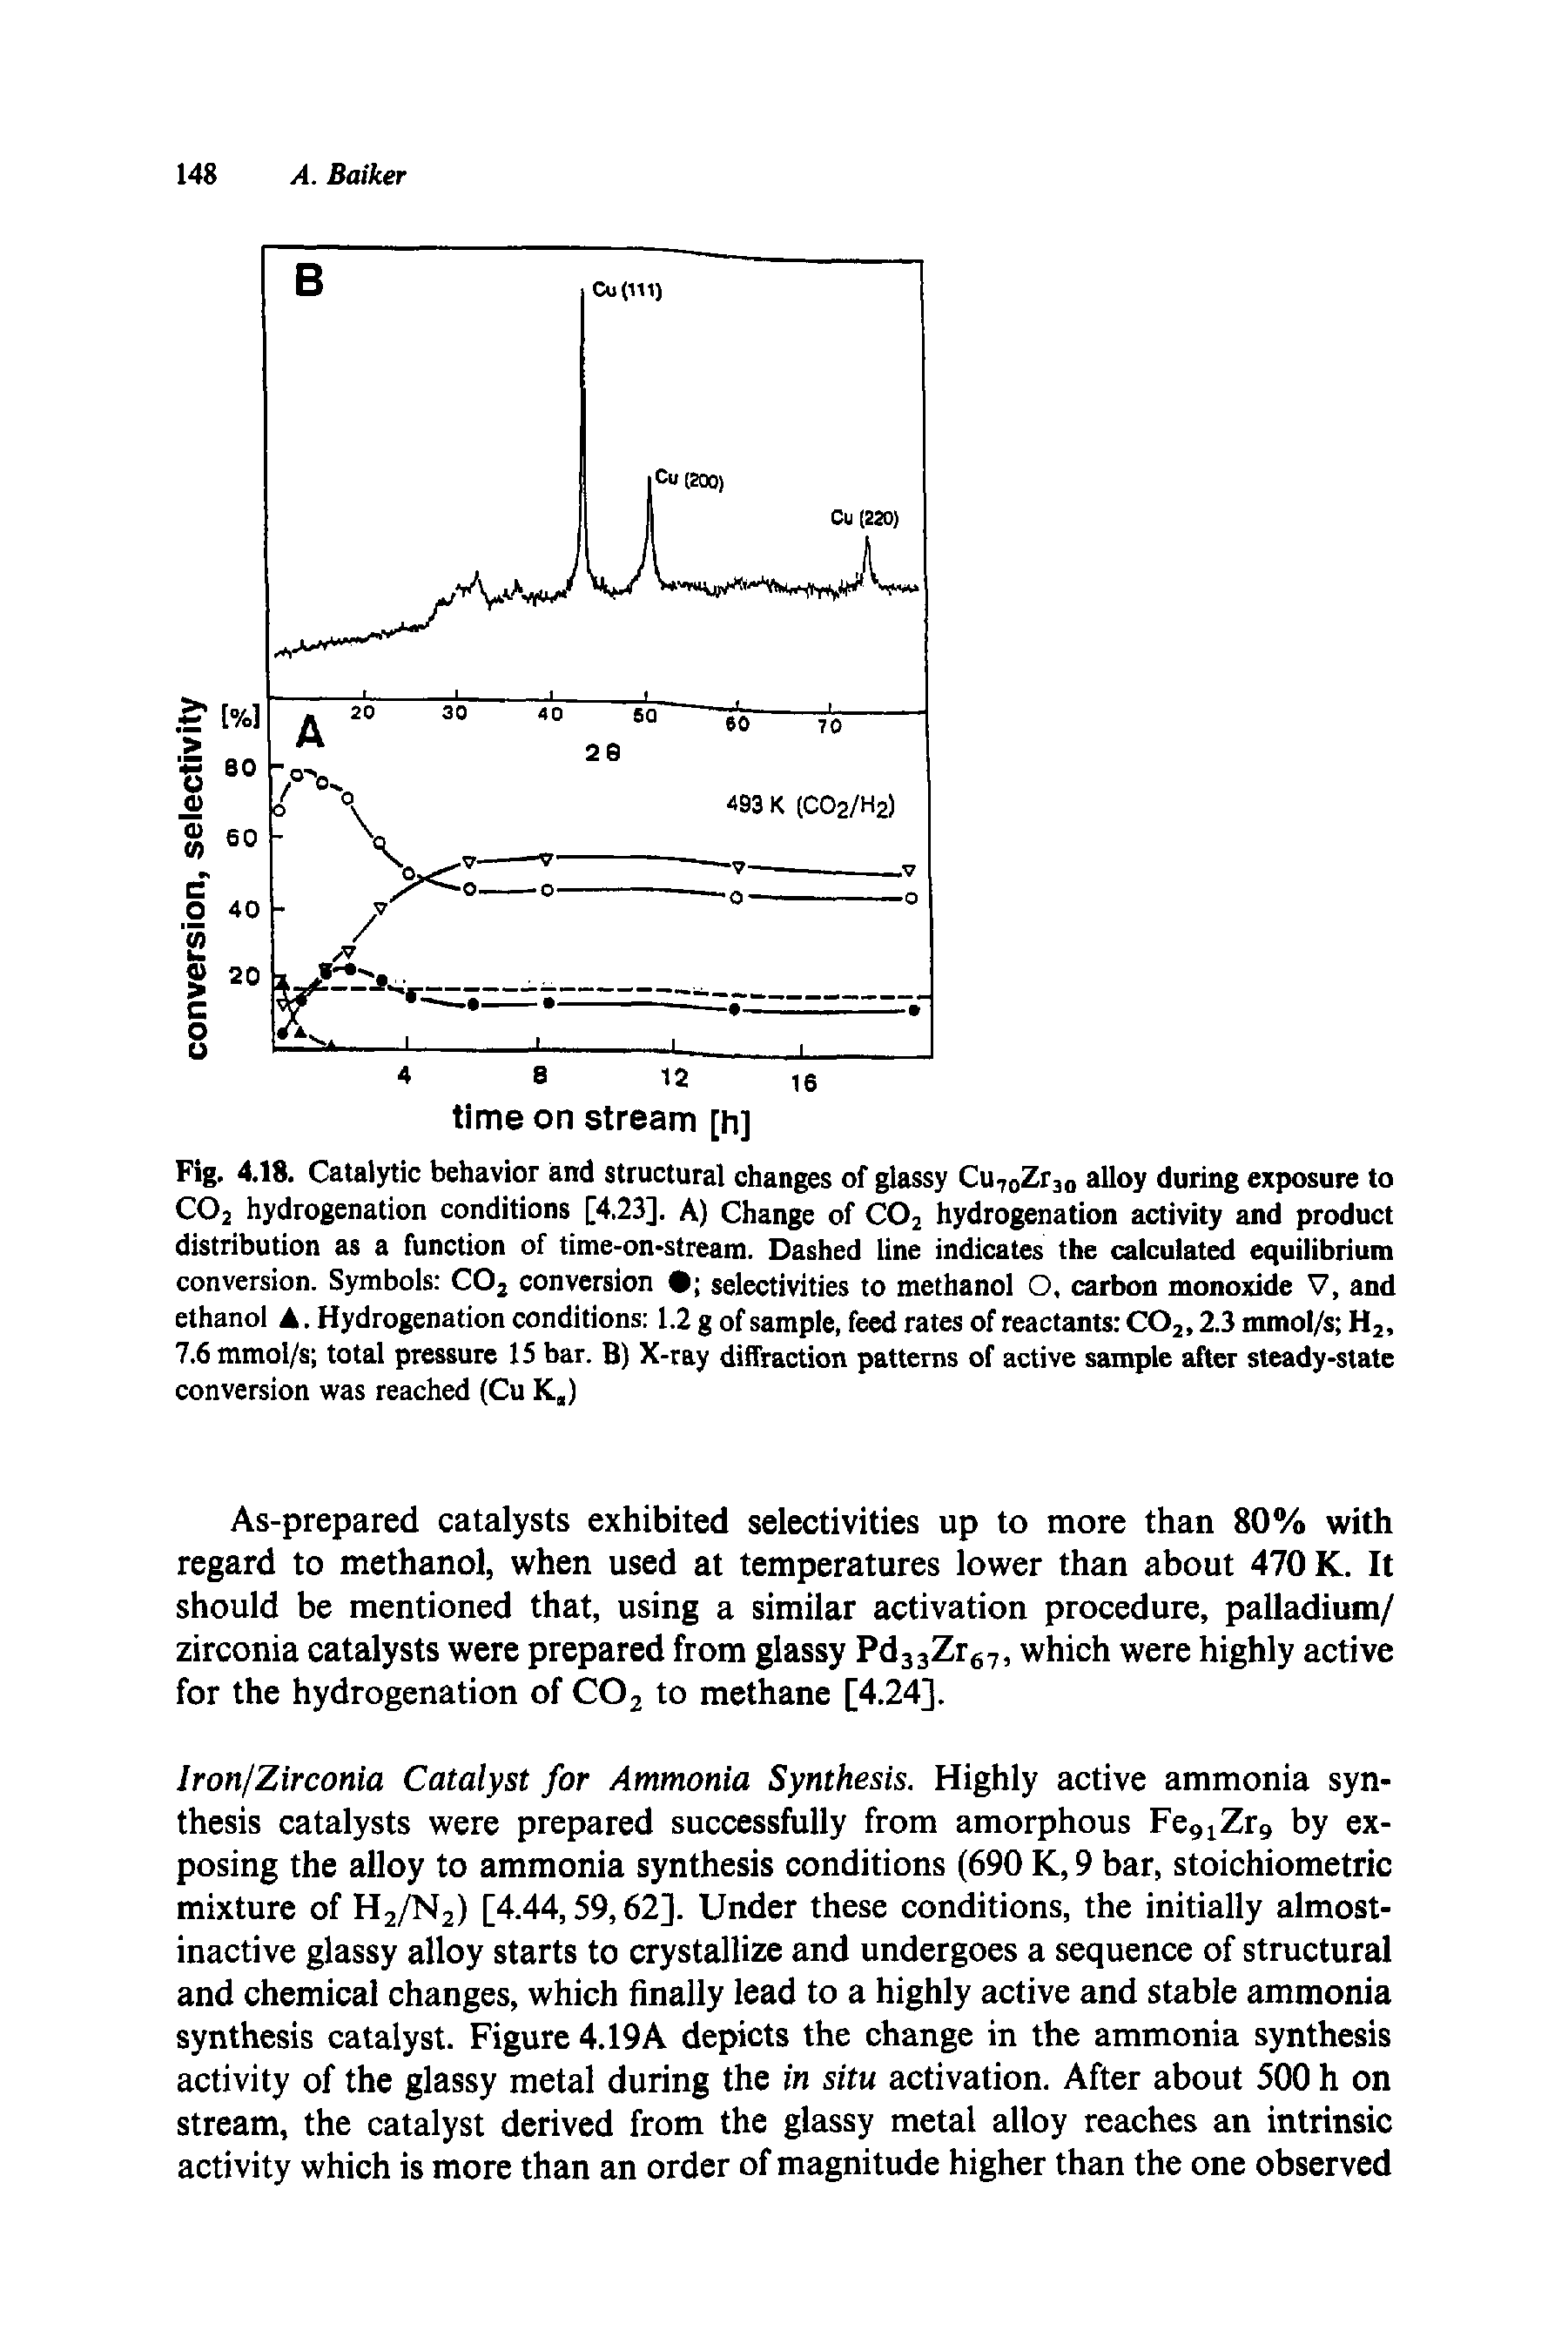 Fig. 4.18. Catalytic behavior and structural changes of glassy Cu7oZr30 alloy during exposure to CO2 hydrogenation conditions [4.23], A) Change of C02 hydrogenation activity and product distribution as a function of time-on-stream. Dashed line indicates the calculated equilibrium conversion. Symbols C02 conversion selectivities to methanol O, carbon monoxide V, and ethanol A. Hydrogenation conditions 1.2 g of sample, feed rates of reactants C02,2.3 mmol/s H2, 7.6 mmol/s total pressure 15 bar. B) X-ray diffraction patterns of active sample after steady-state conversion was reached (Cu K,)...